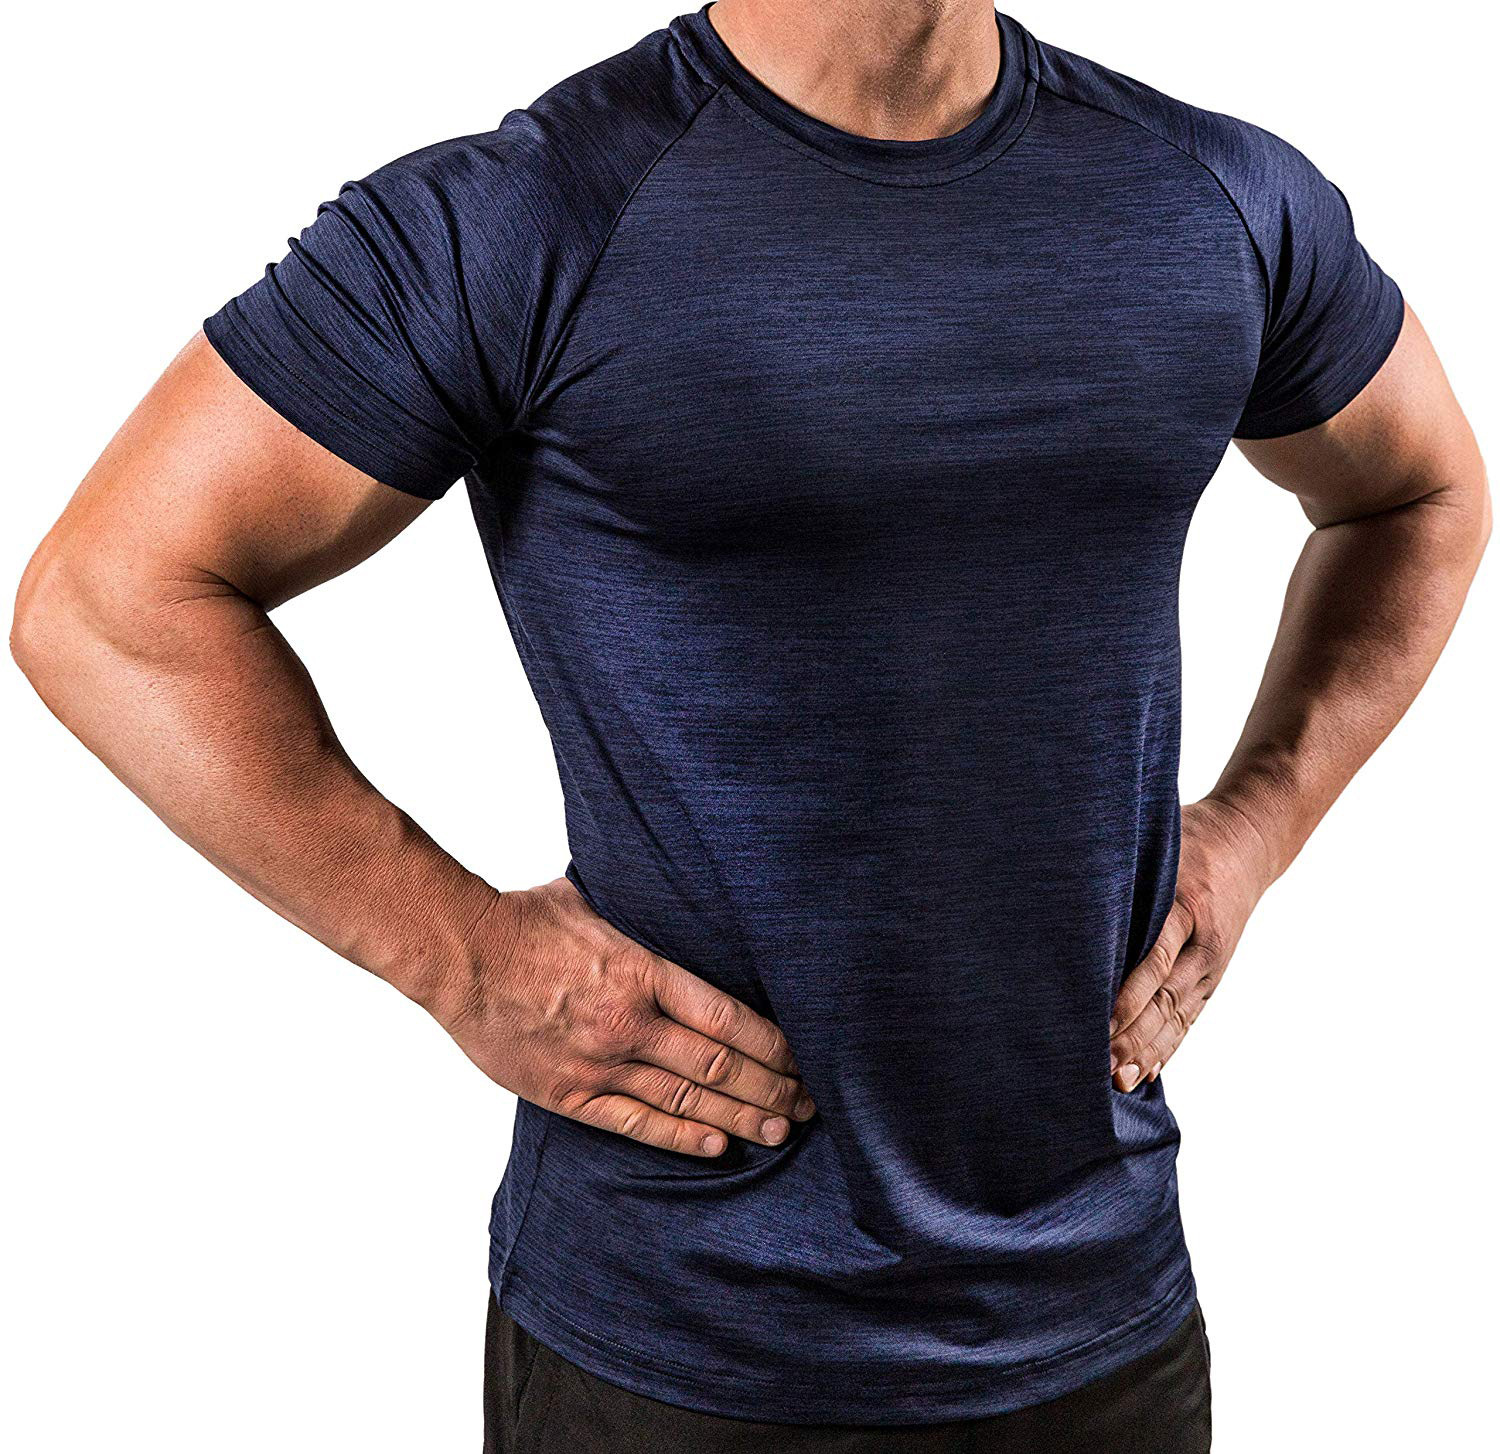 Men's Outdoor Quick-drying Breathable Chic Sports Running High Elastic Slim Fit T-shirt